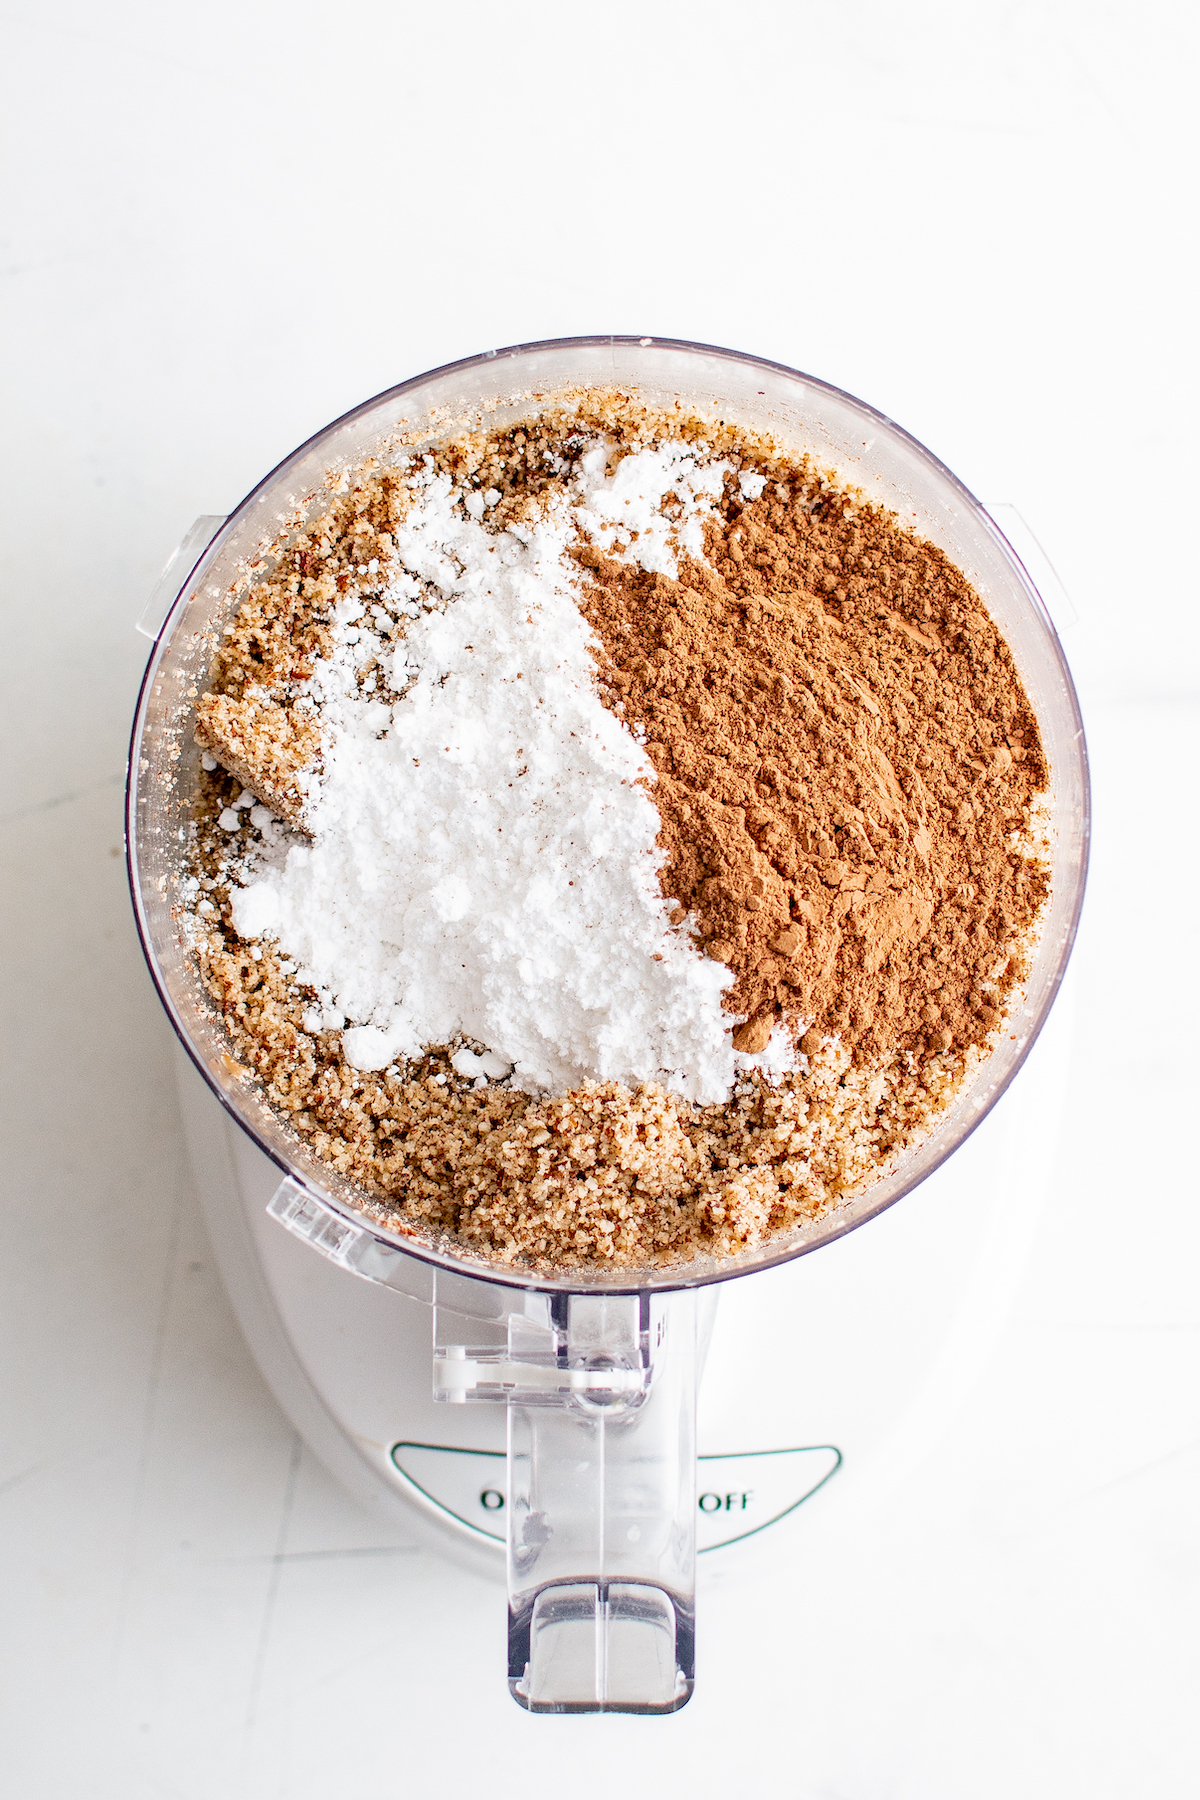 Ground hazelnuts, powdered sugar, and other ingredients in a food processor.